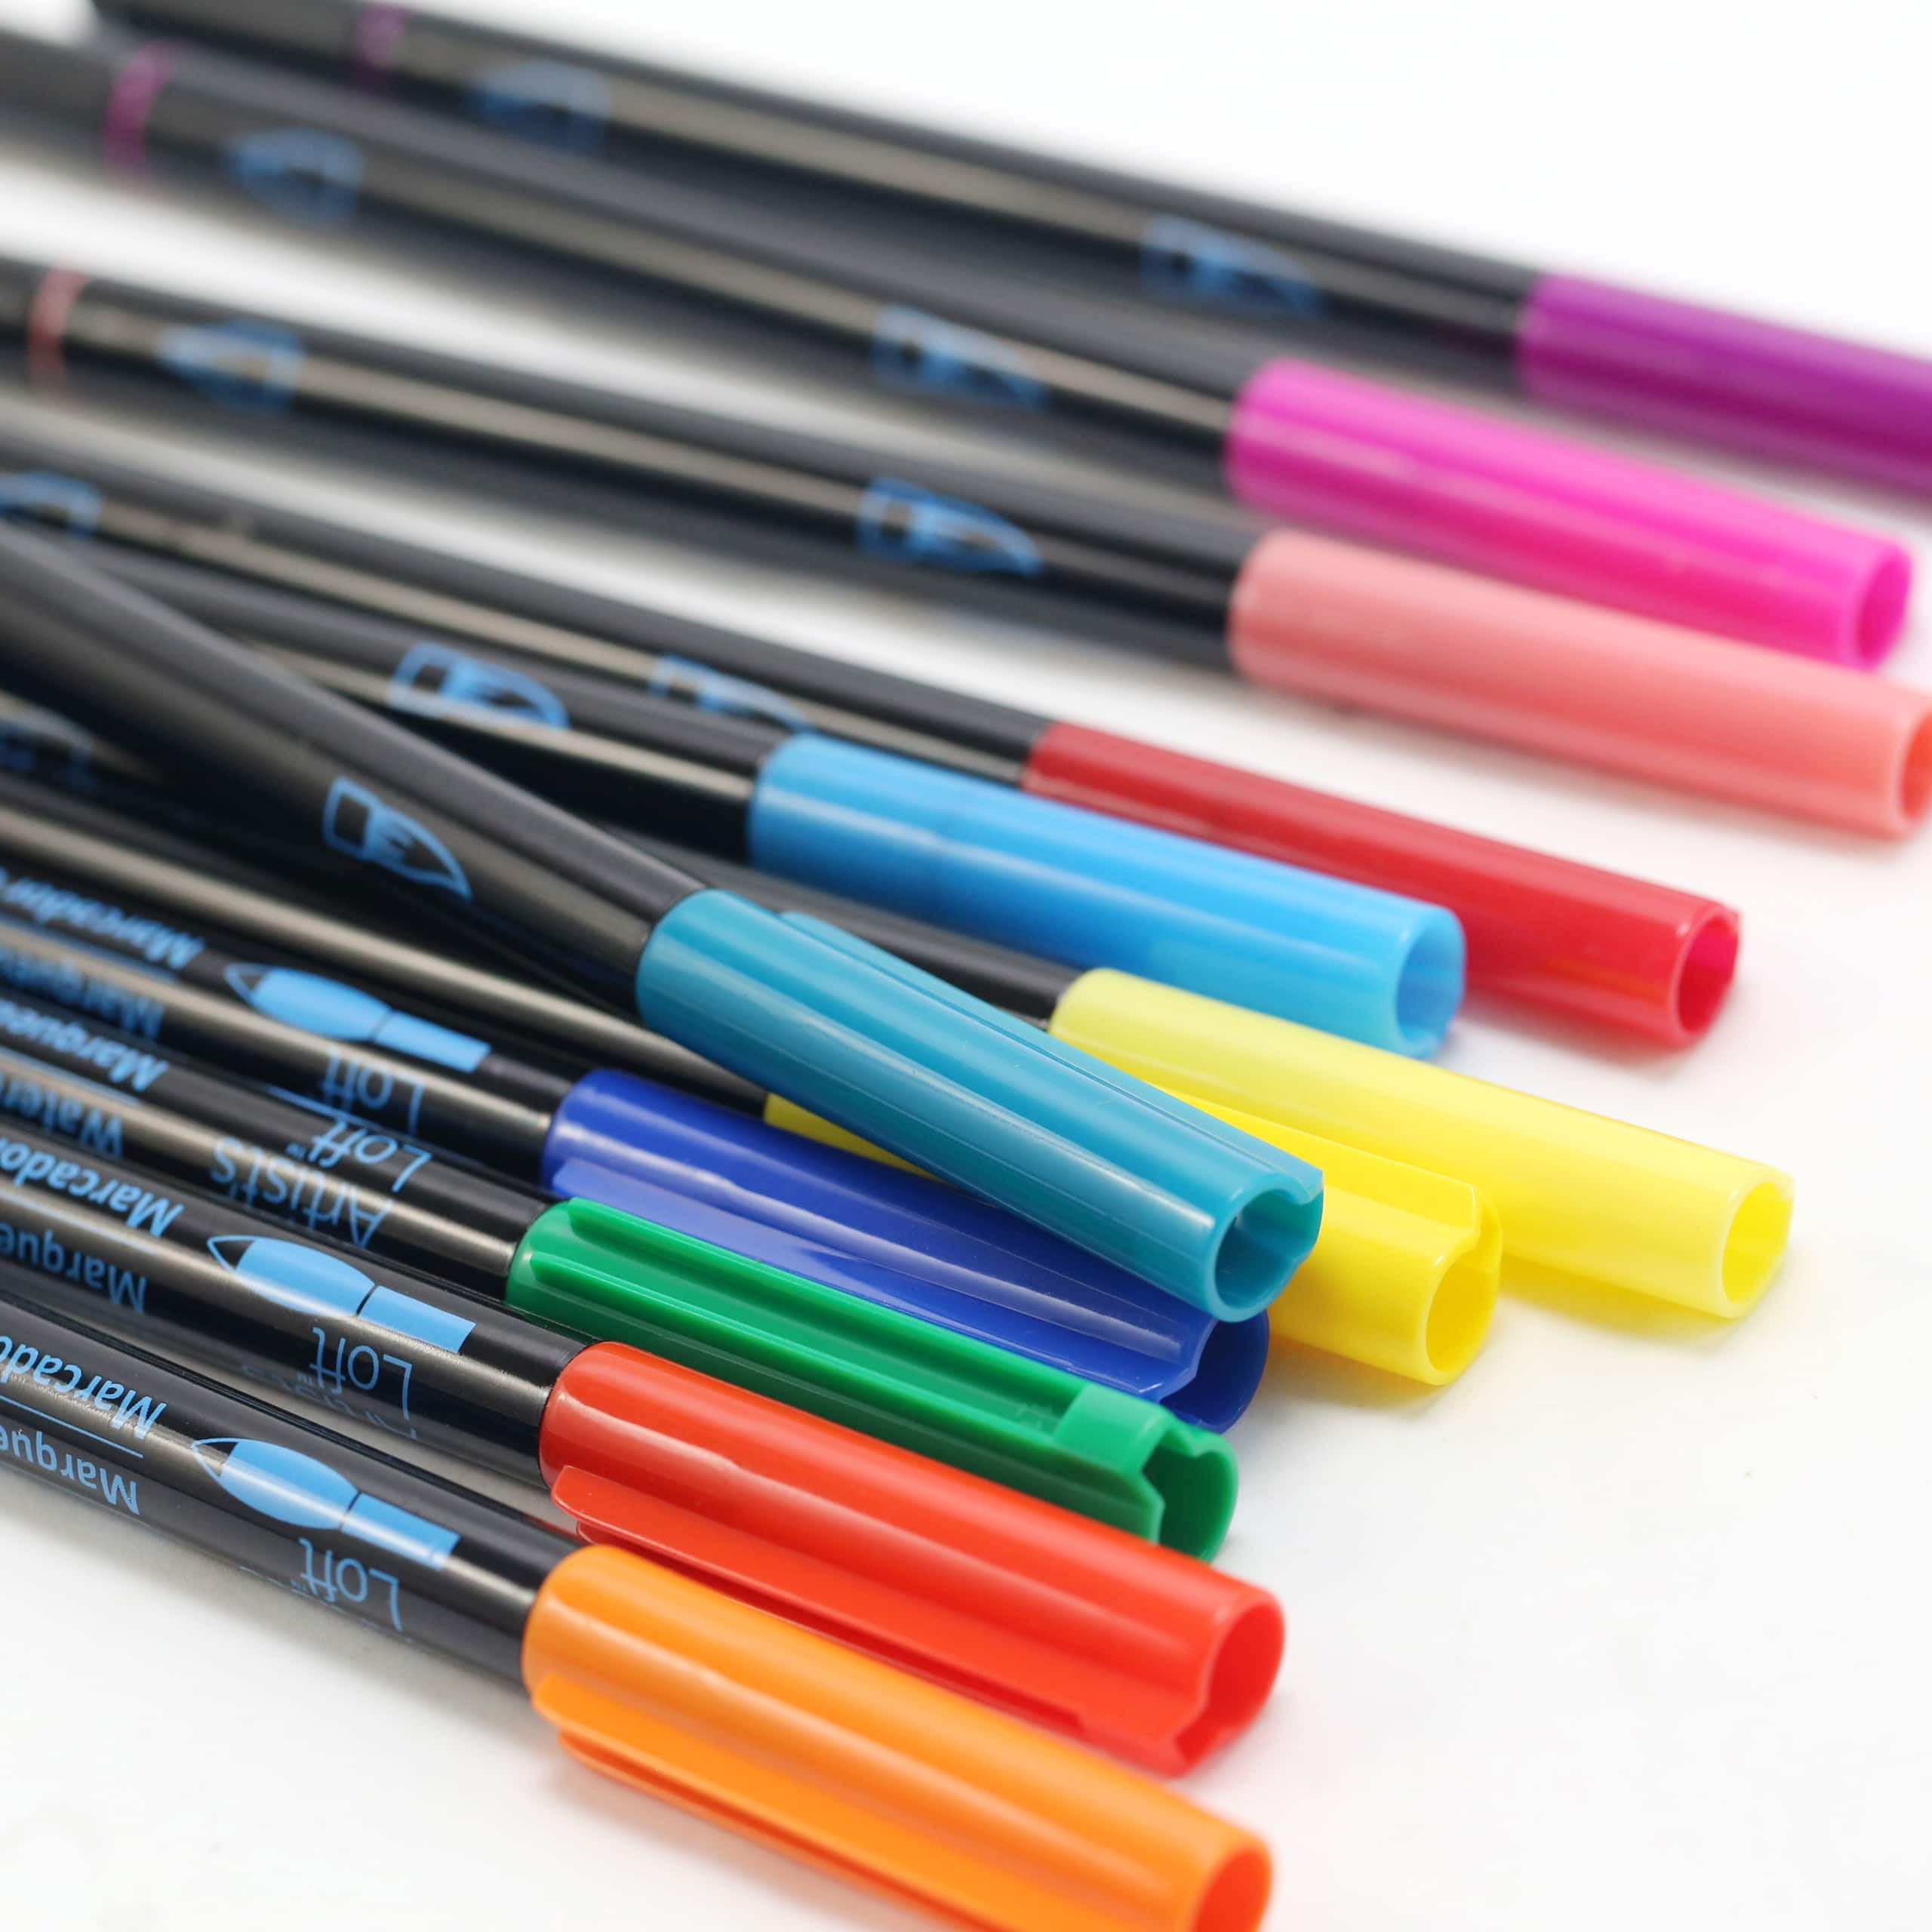 6 Packs: 6 ct. (36 total) Pastel Level 2 Dual Tip Sketch Markers by  Artist's Loft™